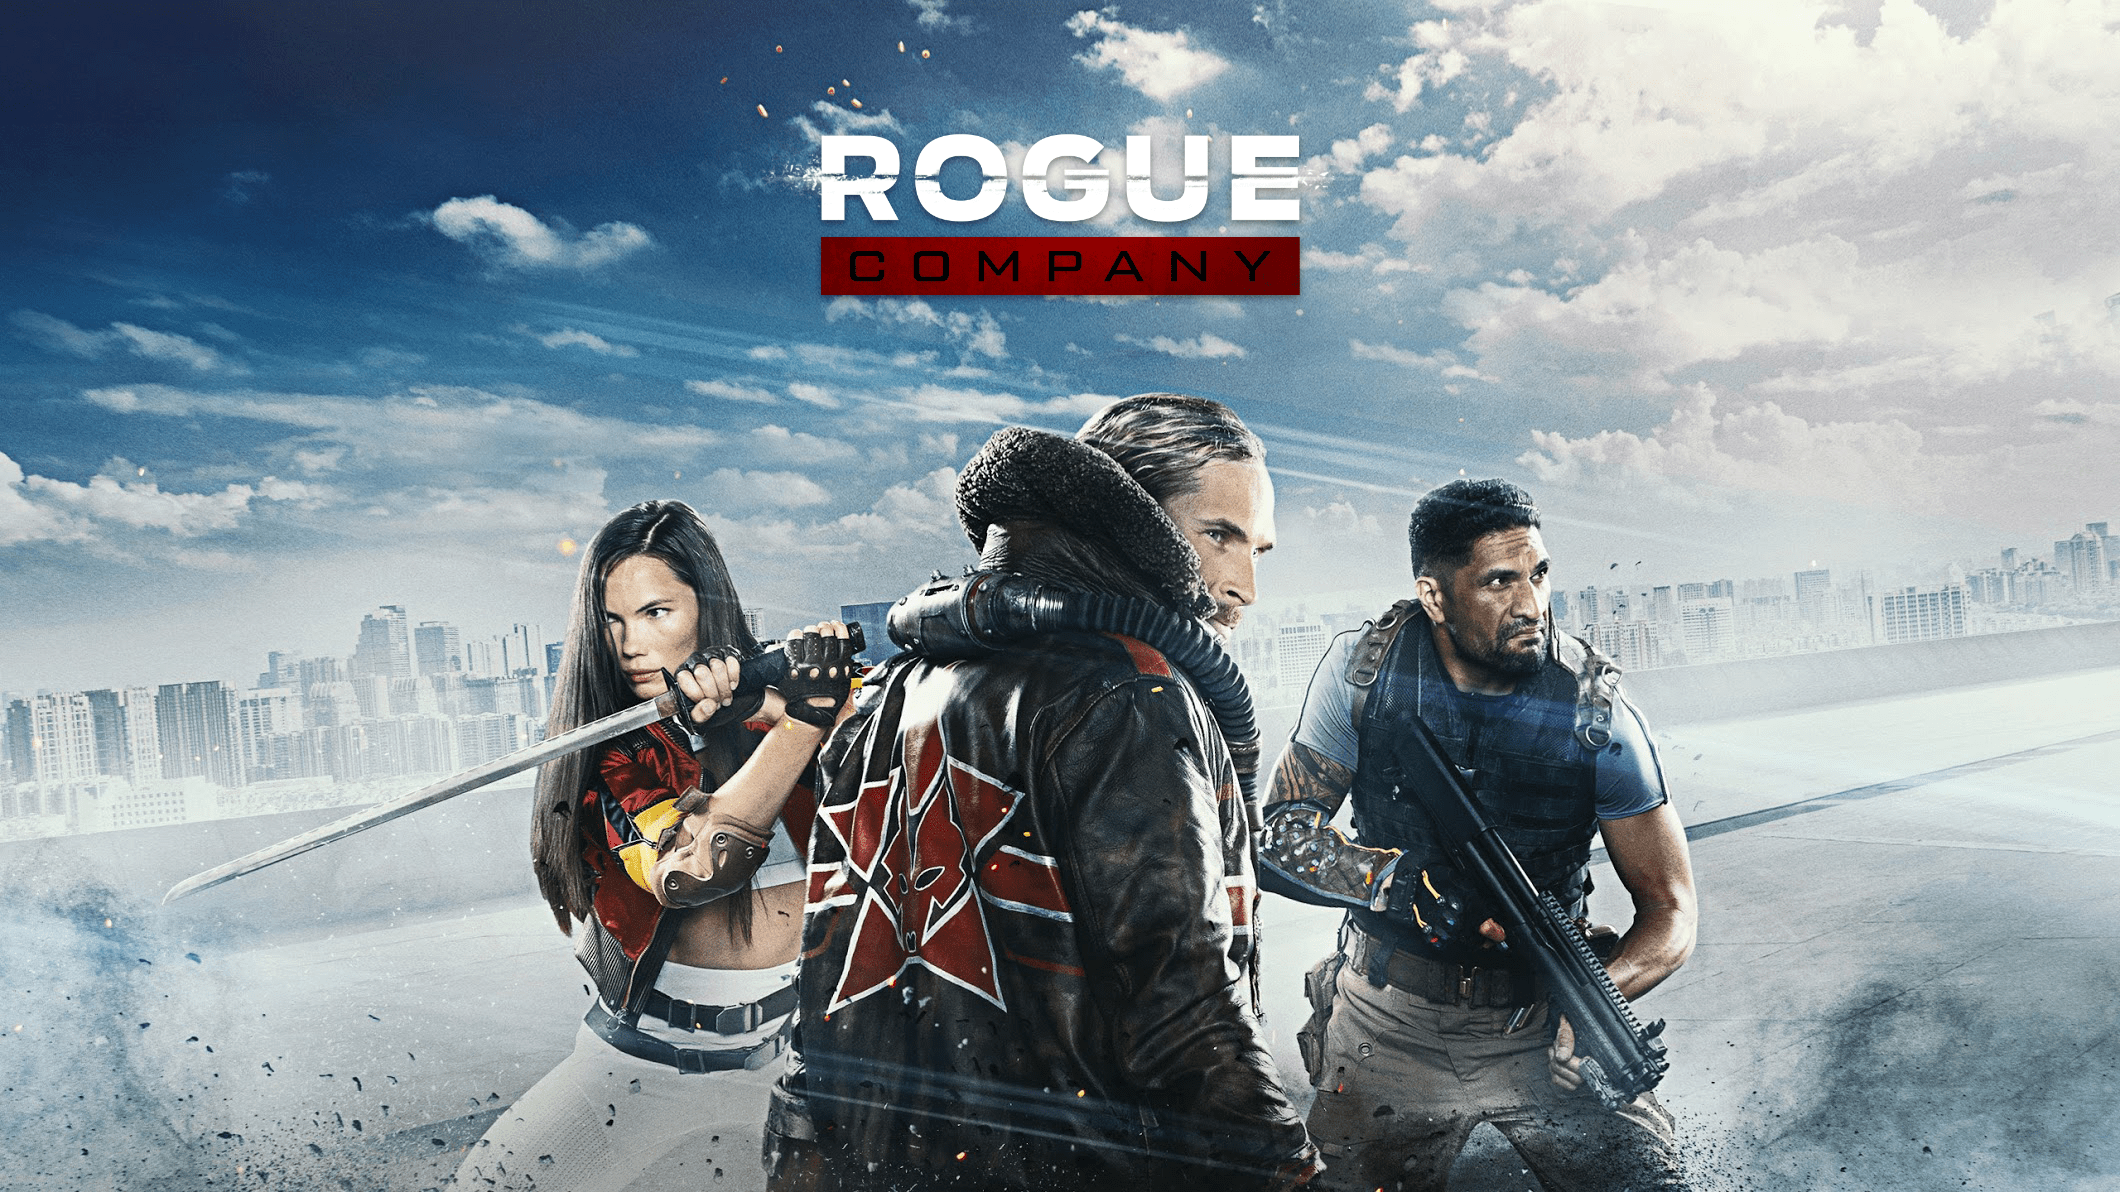 Rogue Company Wallpapers - Top Free Rogue Company Backgrounds ...